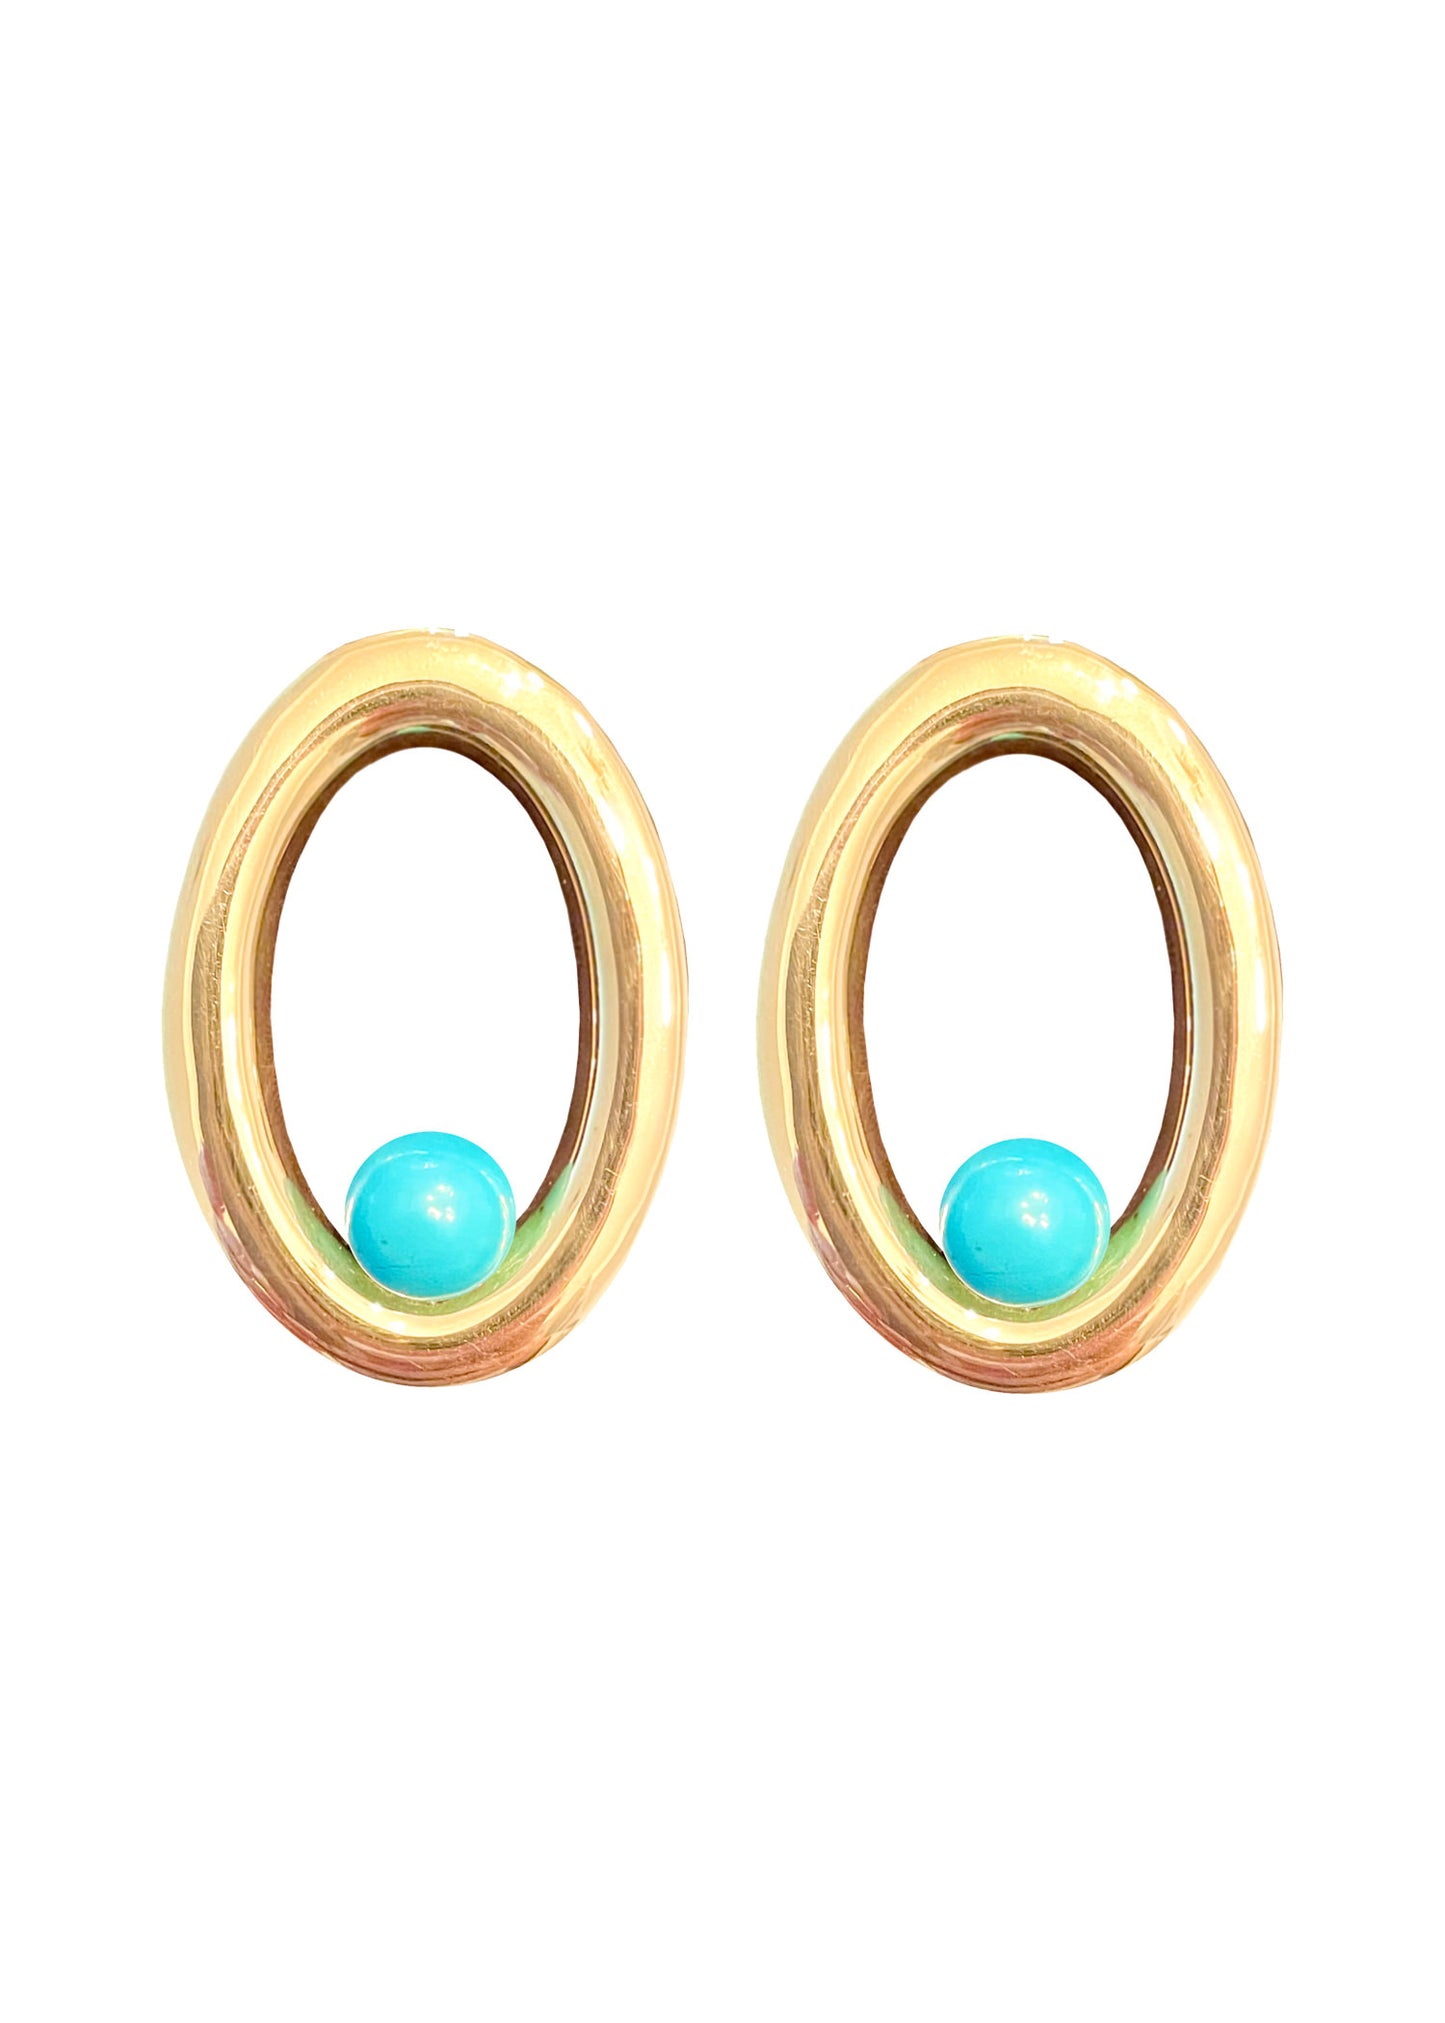 Gold Oval Hoop Earrings with Turquoise